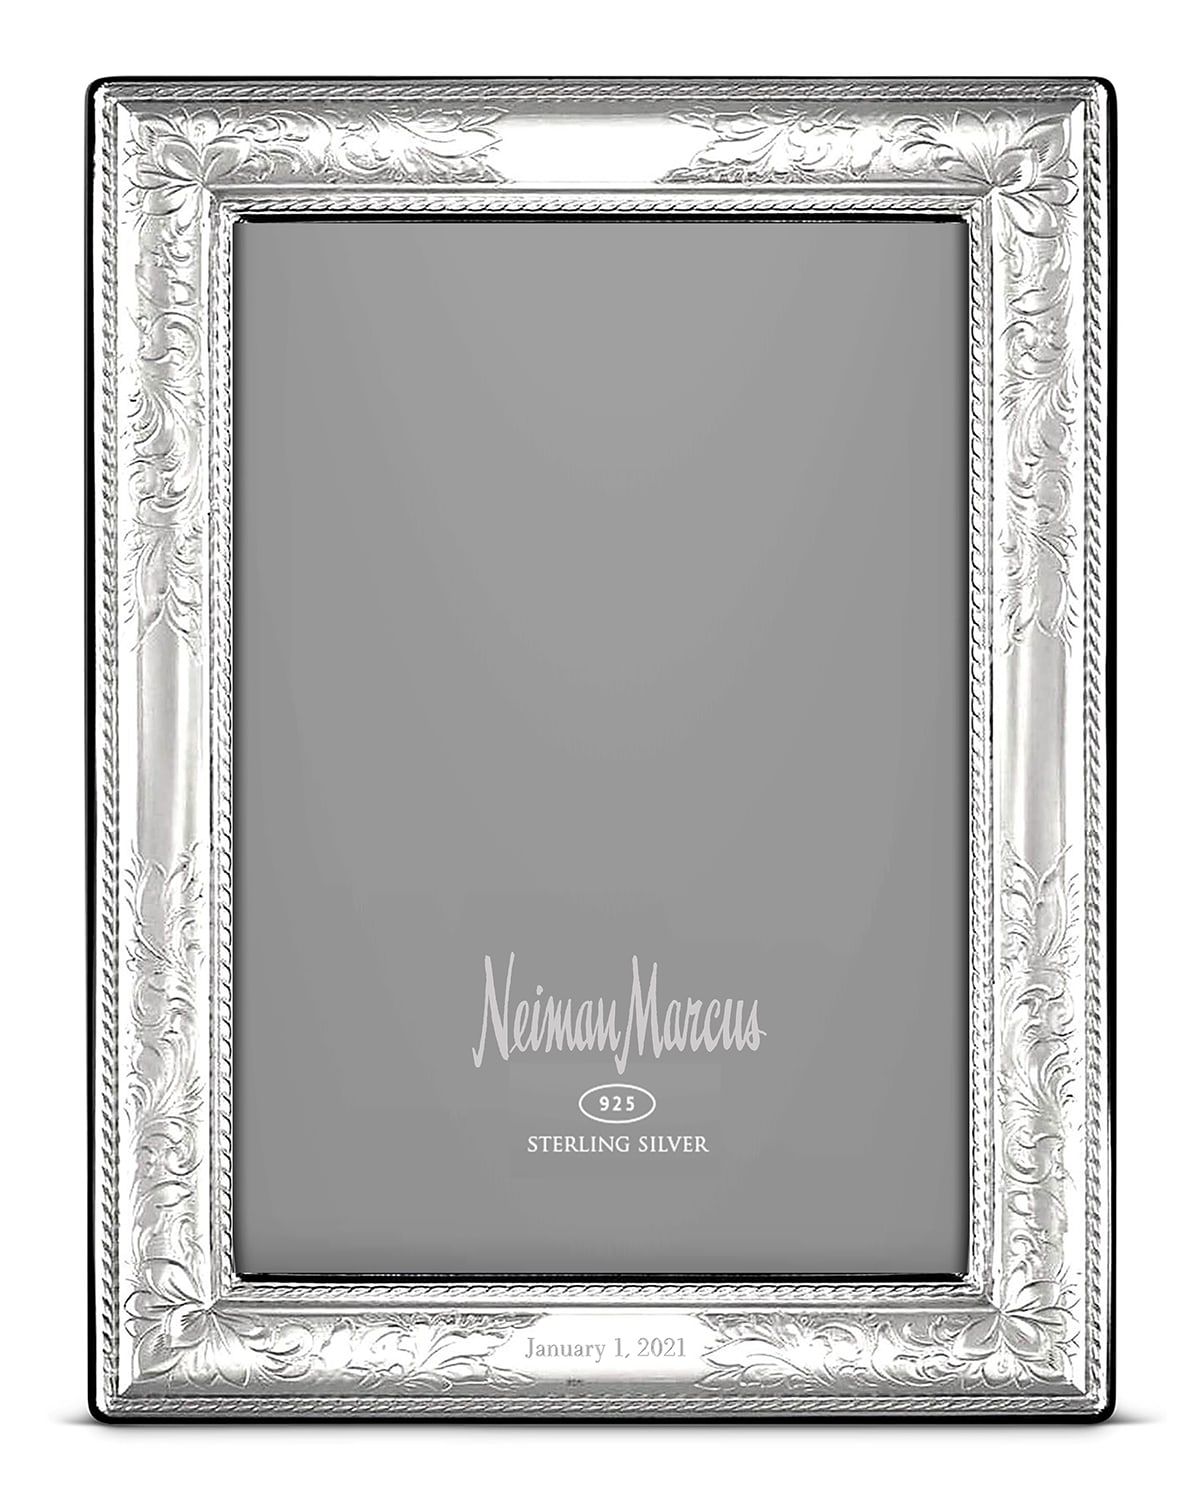 Cunill America Vintage Personalized Frame, 4" X 6" In Silver Block Font